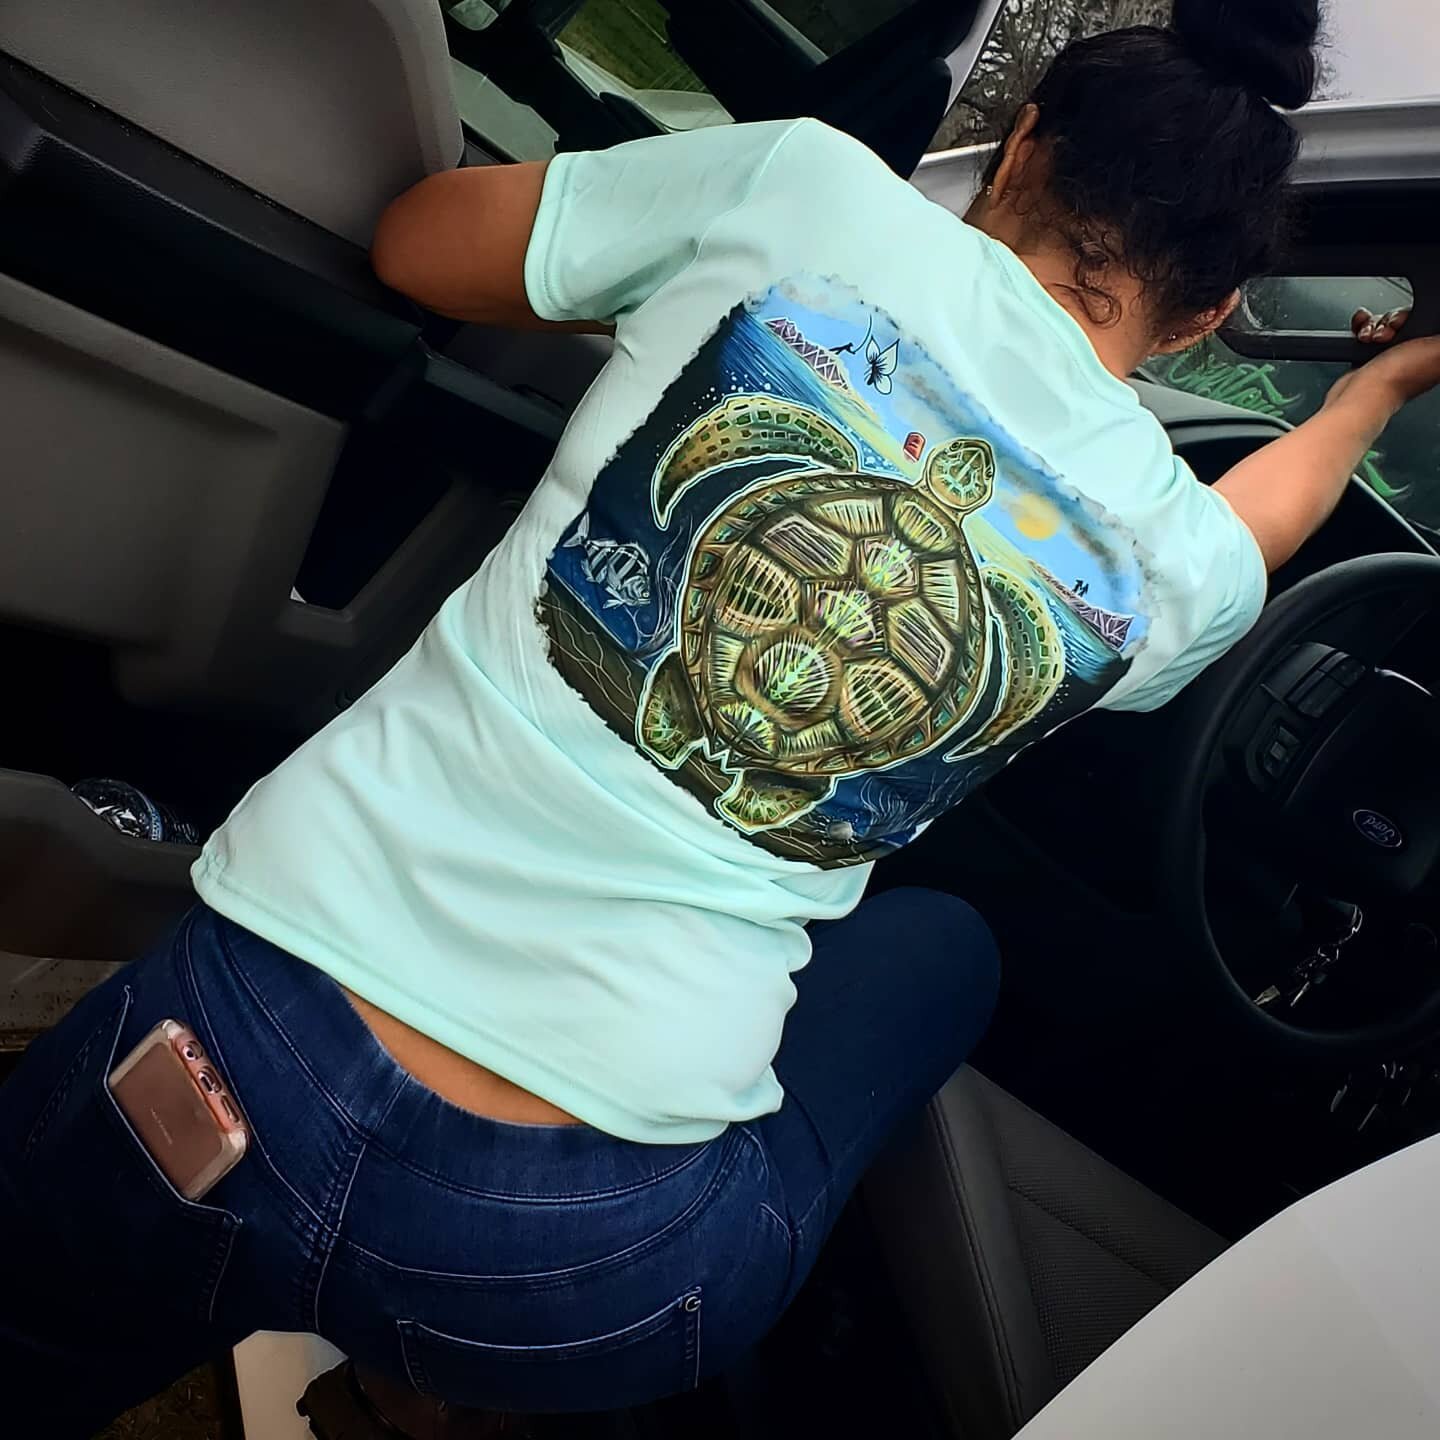 We have a great selection of women's shirts too! #seaturtle #women #fishing #trucks #girls